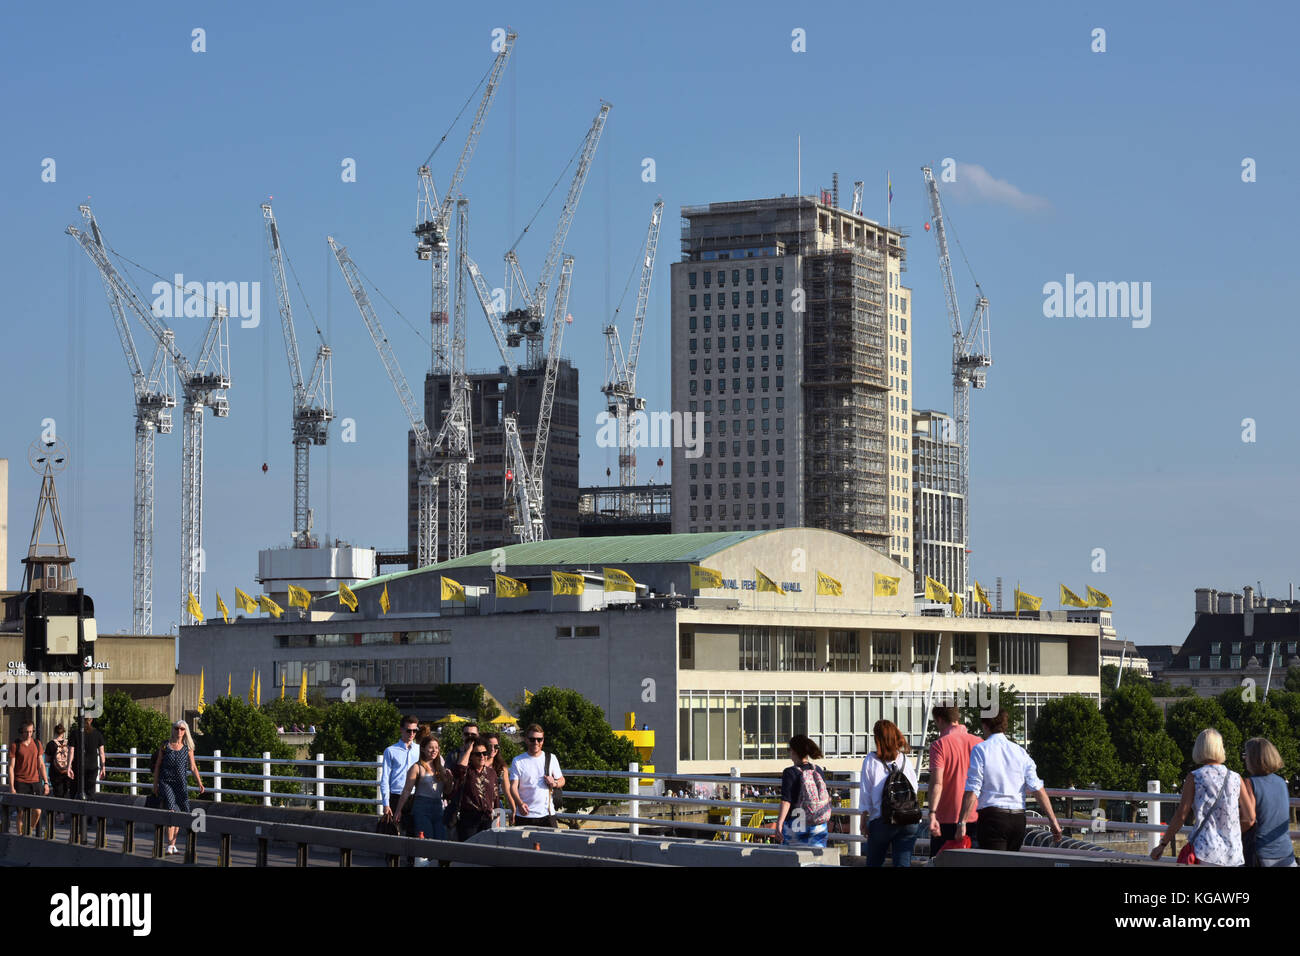 Cranes being used for Southbank Place, the new mixed residential housing, offices and retail spaces being developed on the South Bank near Waterloo Ra Stock Photo